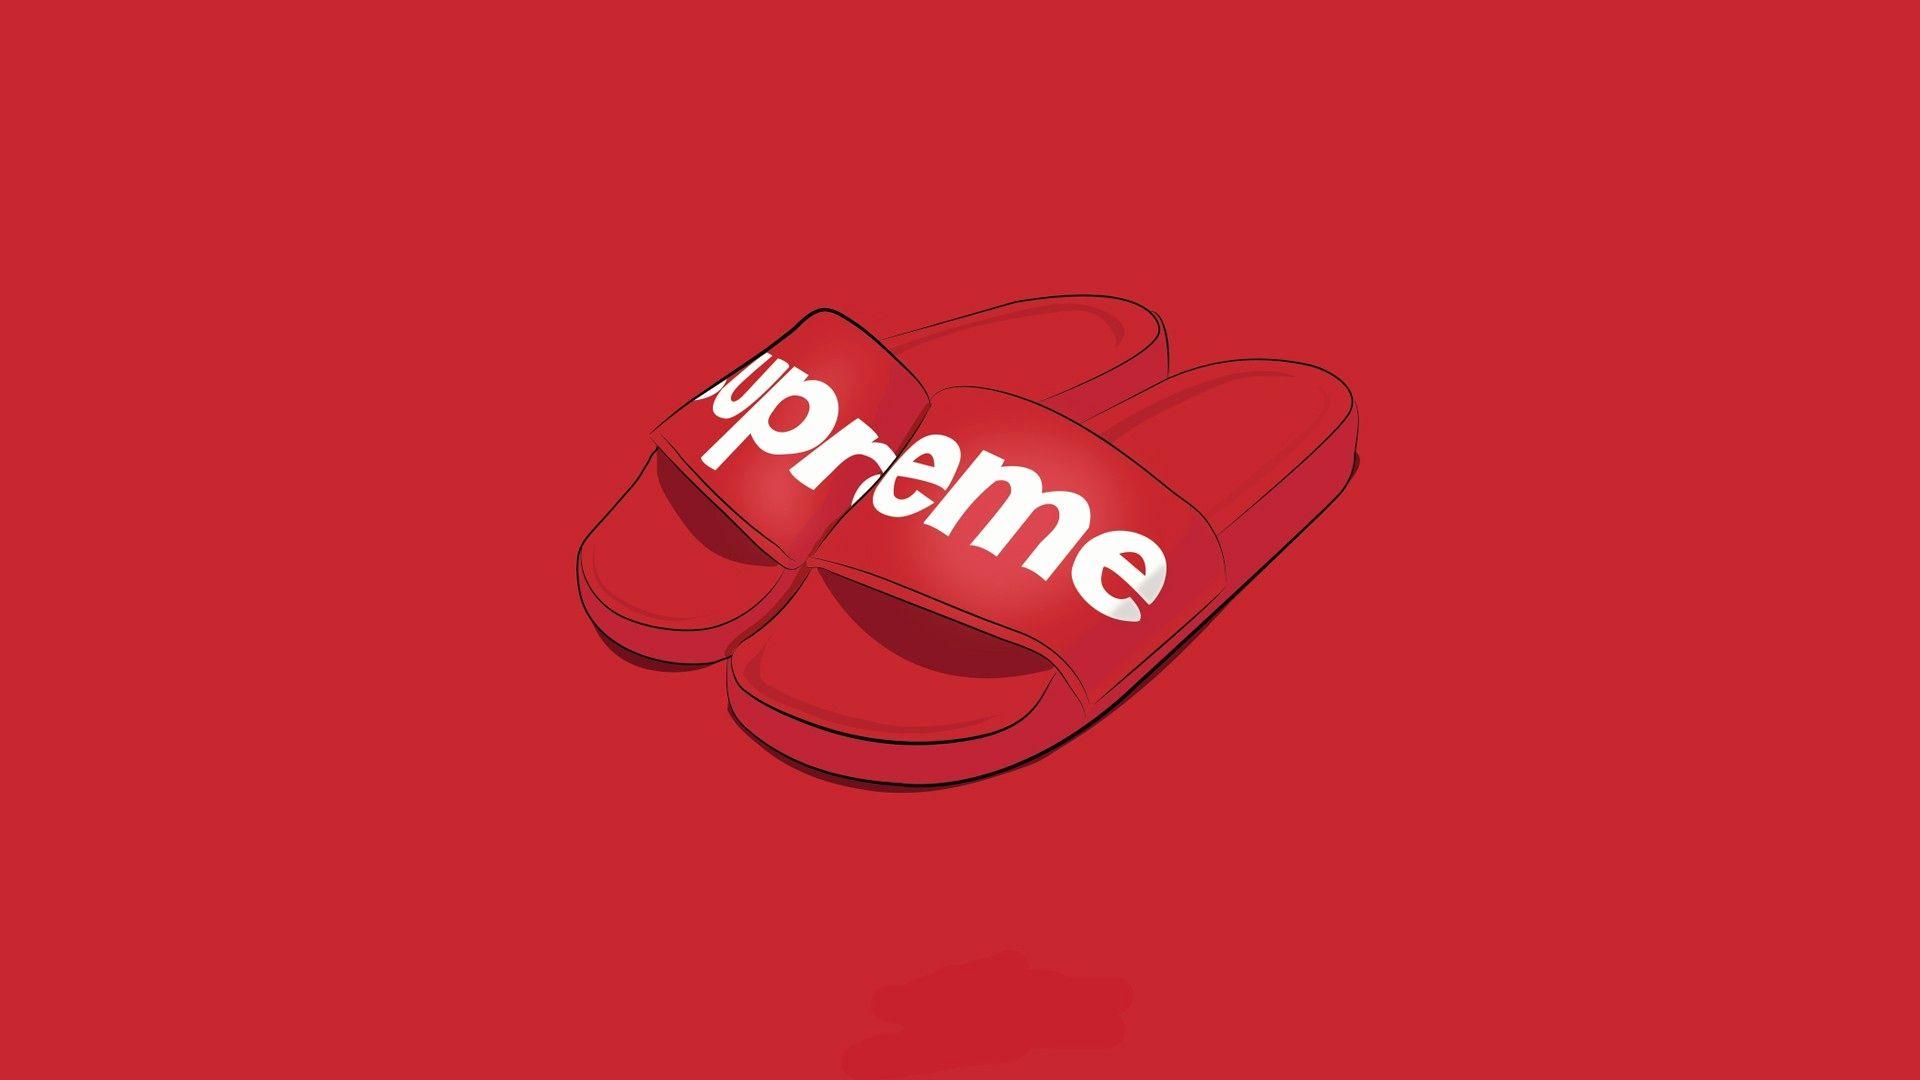 Awesome Supreme Wallpapers - Top Free Awesome Supreme Backgrounds